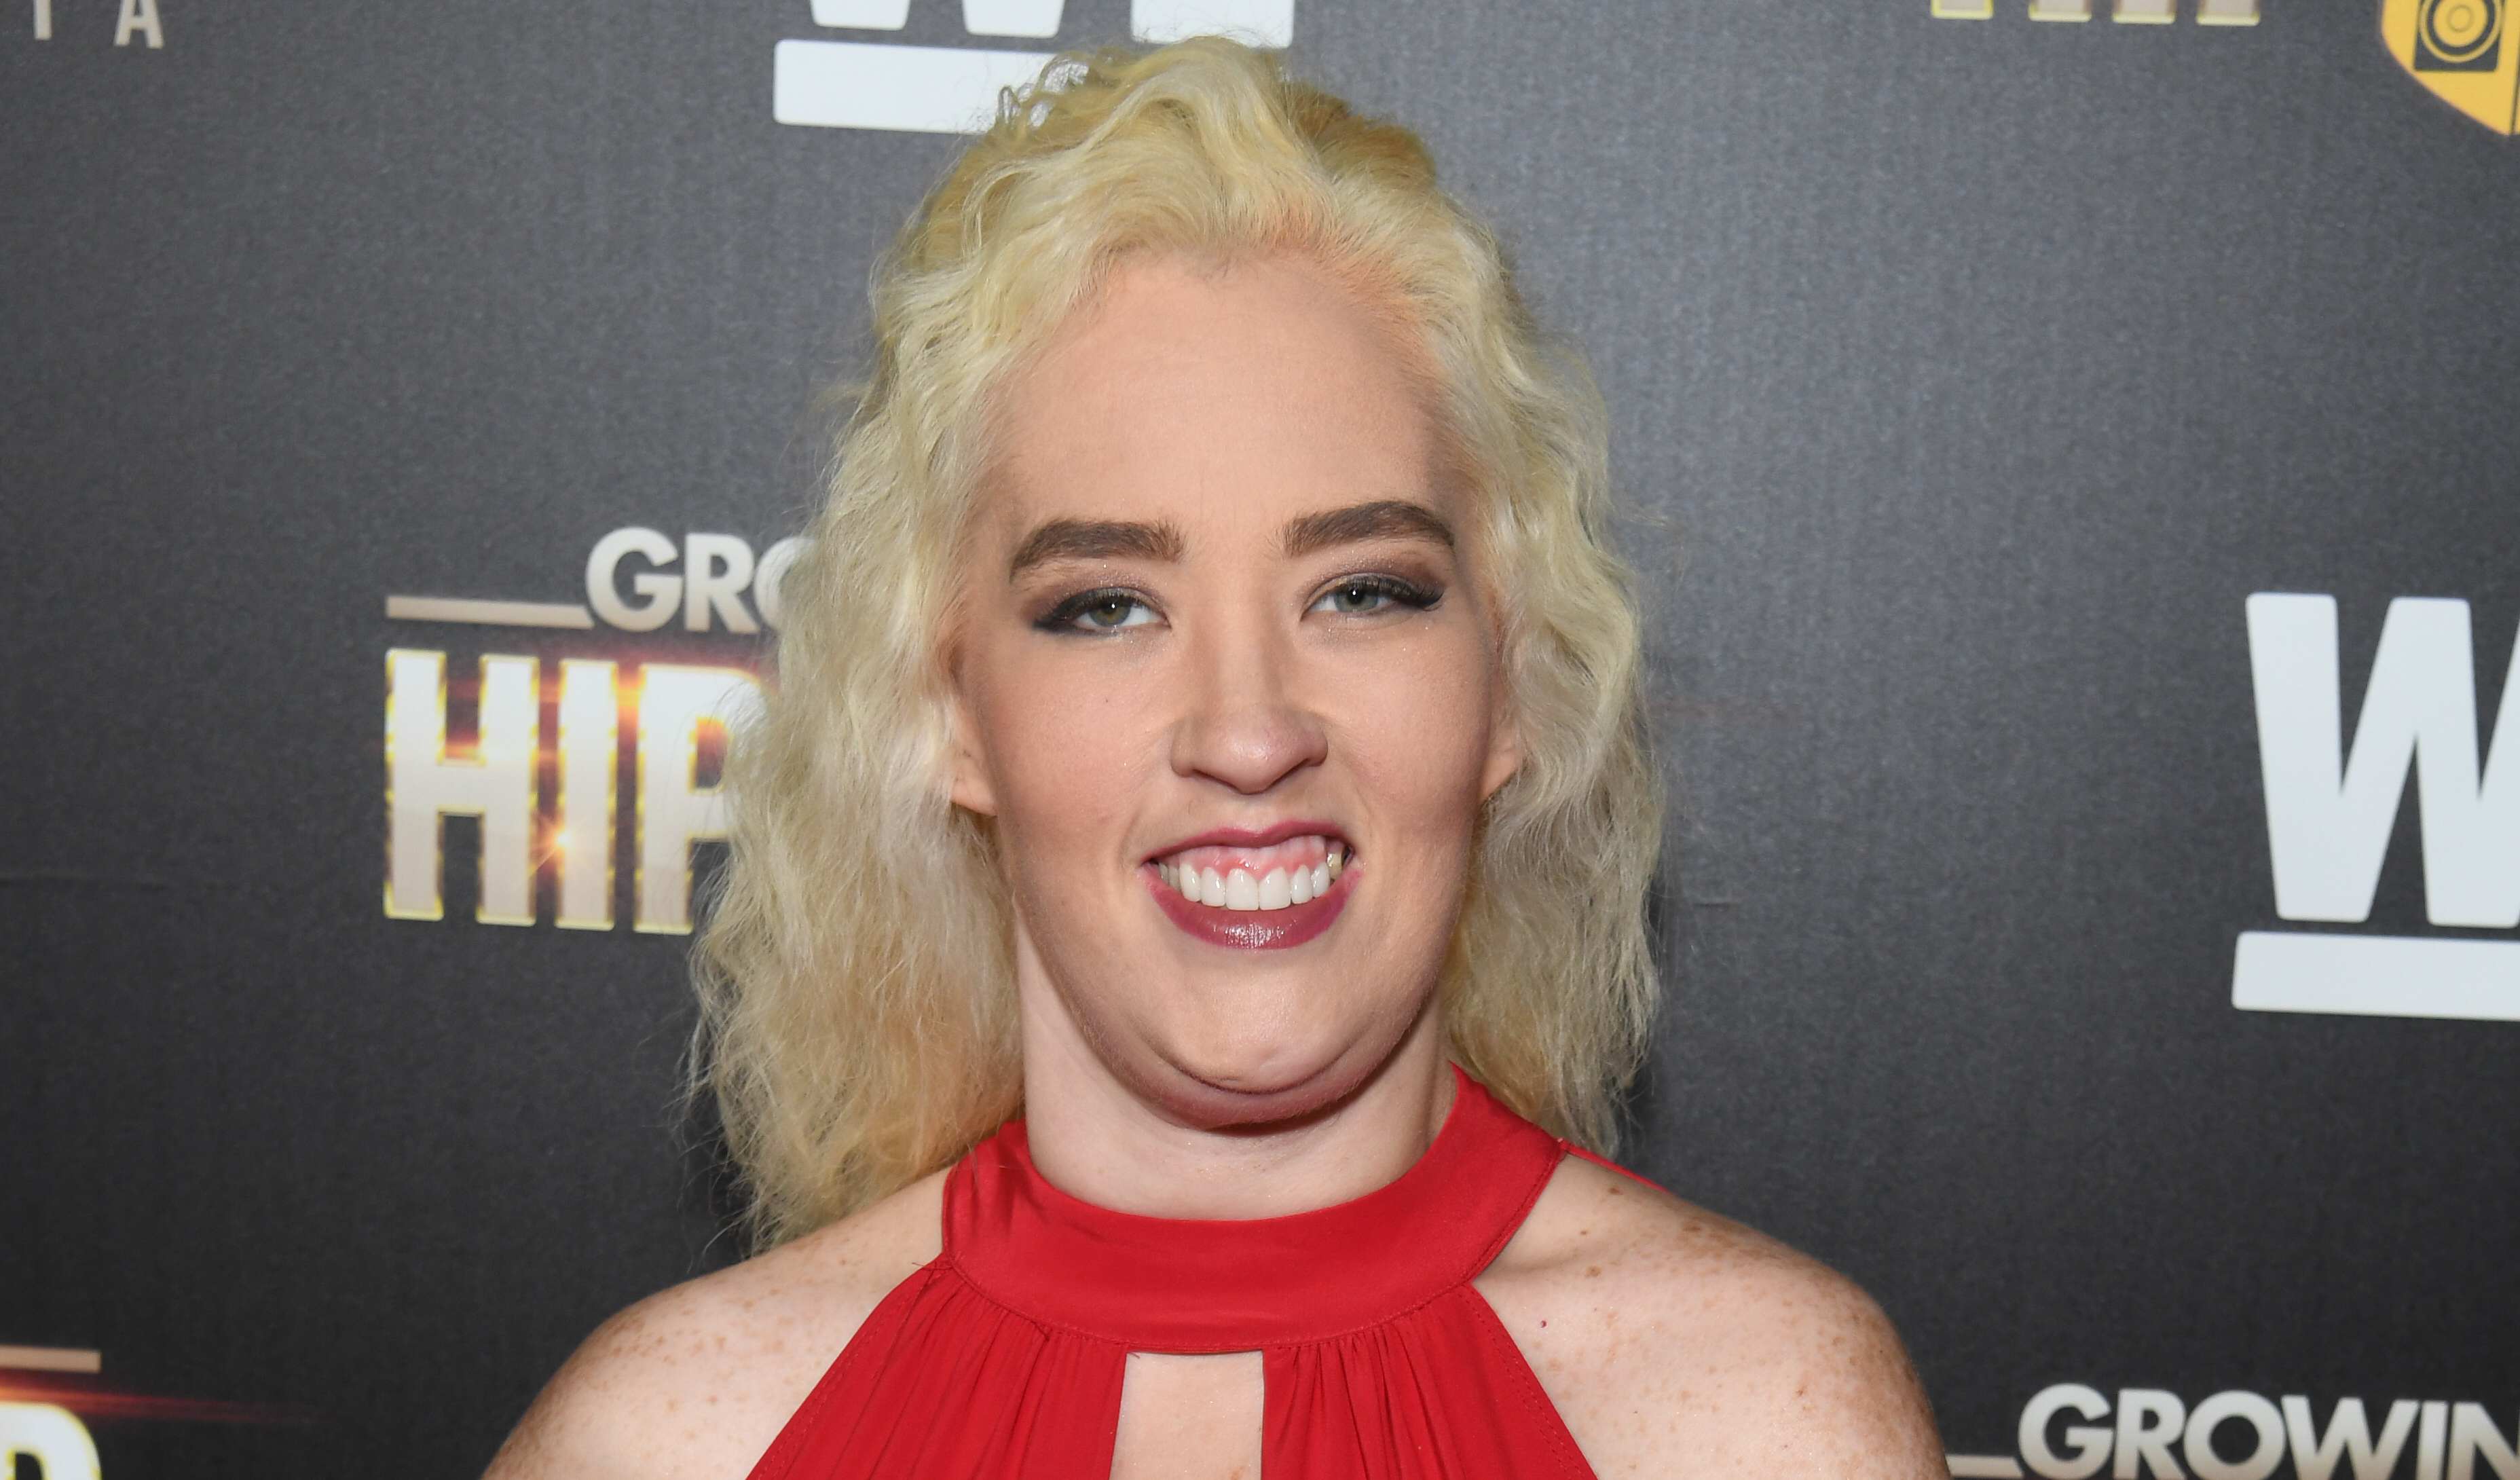 Mama June’s New Look The Reality Star Wants to Make a Workout Video!